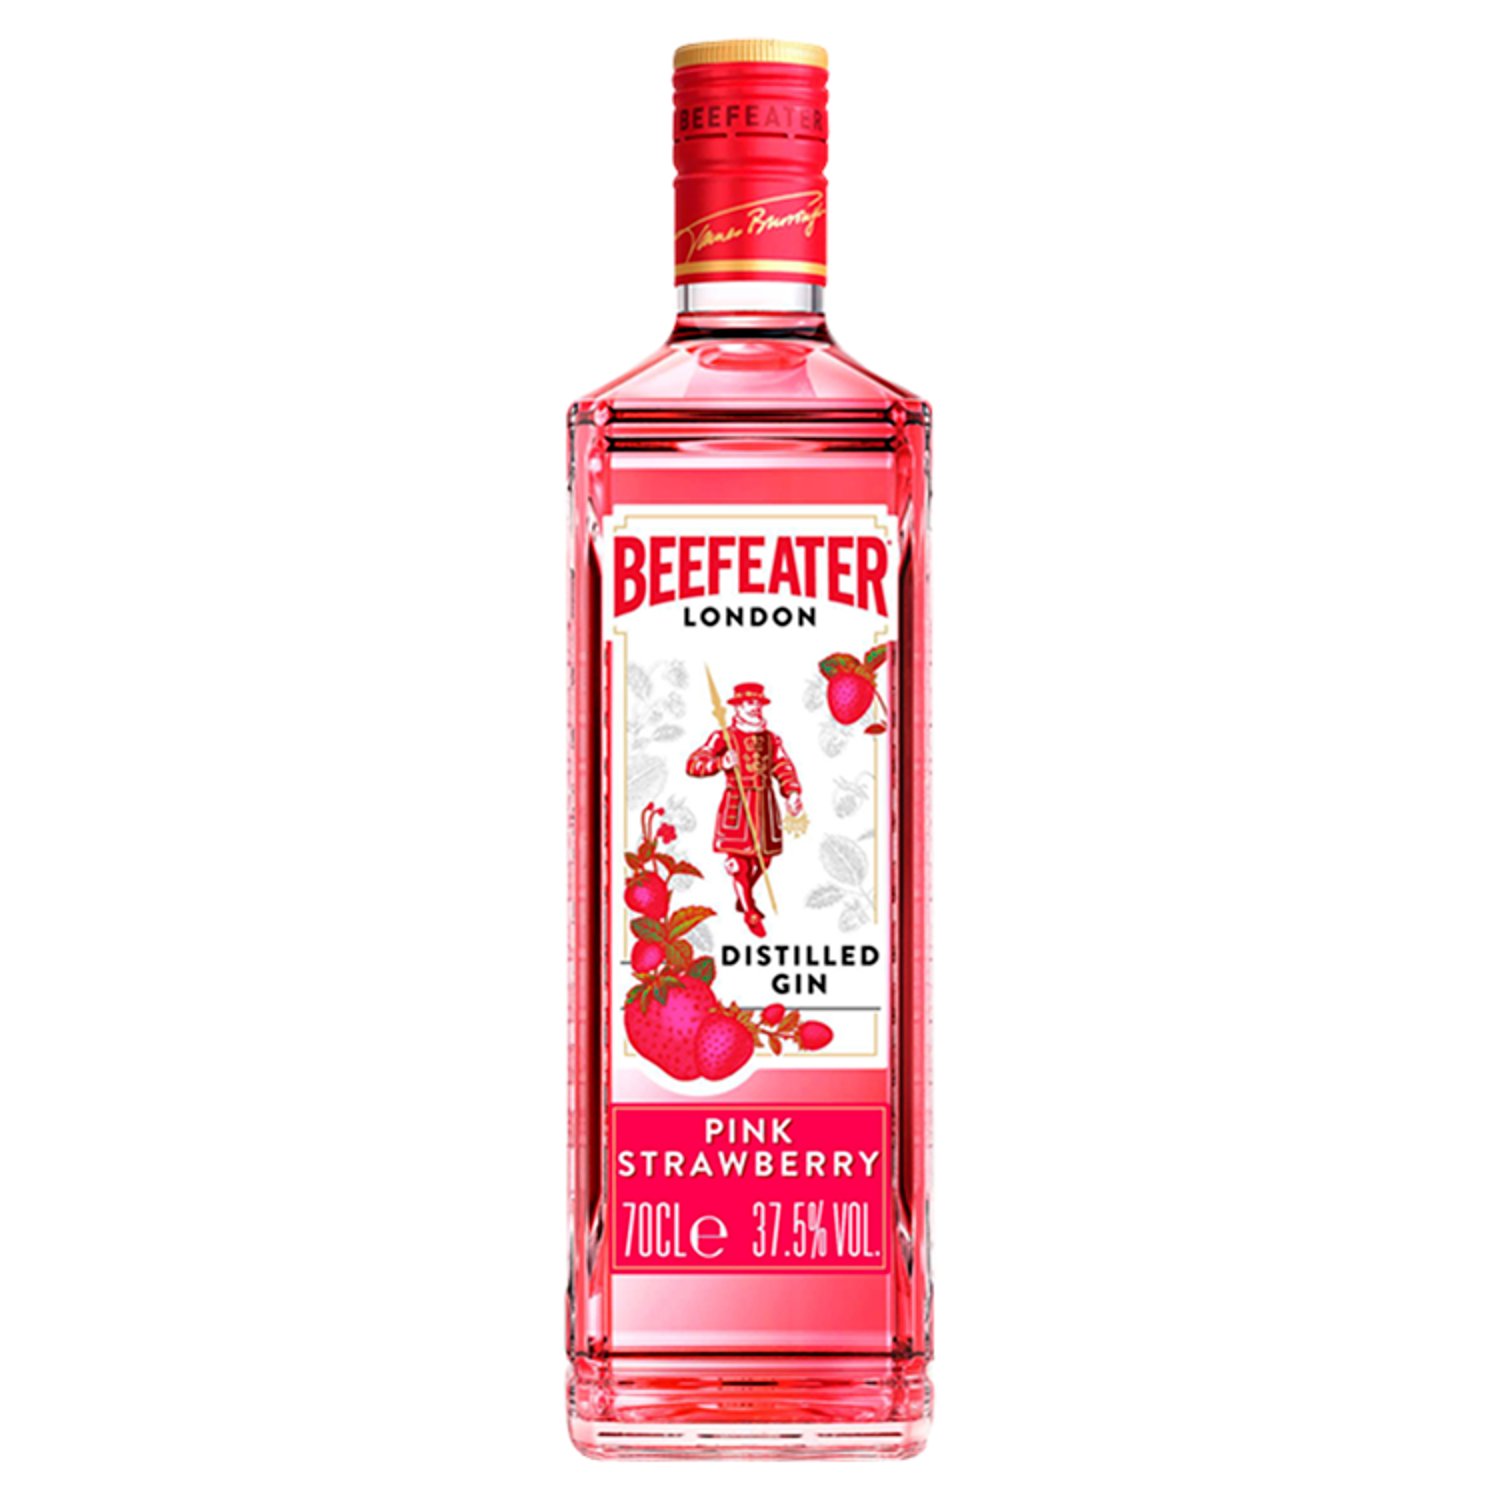 Beefeater Pink is the vibrant strawberry gin from Beefeater London.
The soft fruit flavours of strawberry tune perfectly with classic notes of juniper and citrus to produce a finely balanced contemporary London gin with a hint of sweet Strawberry.
Appearance: Soft Natural Pink
Aroma: Pleasant Strawberry
Try a twist on the classic G & T “The Pink B&T”!
- Ingredients: 50ml Beefeater Pink Strawberry, 150ml Toni or Lemonade, Cubed Ice & Fresh Strawberries.
- Method: Build in an ice filled wine glass, add Beefeater Pink & Tonic water or Lemonade, add strawberry slices& gently stir to combine.